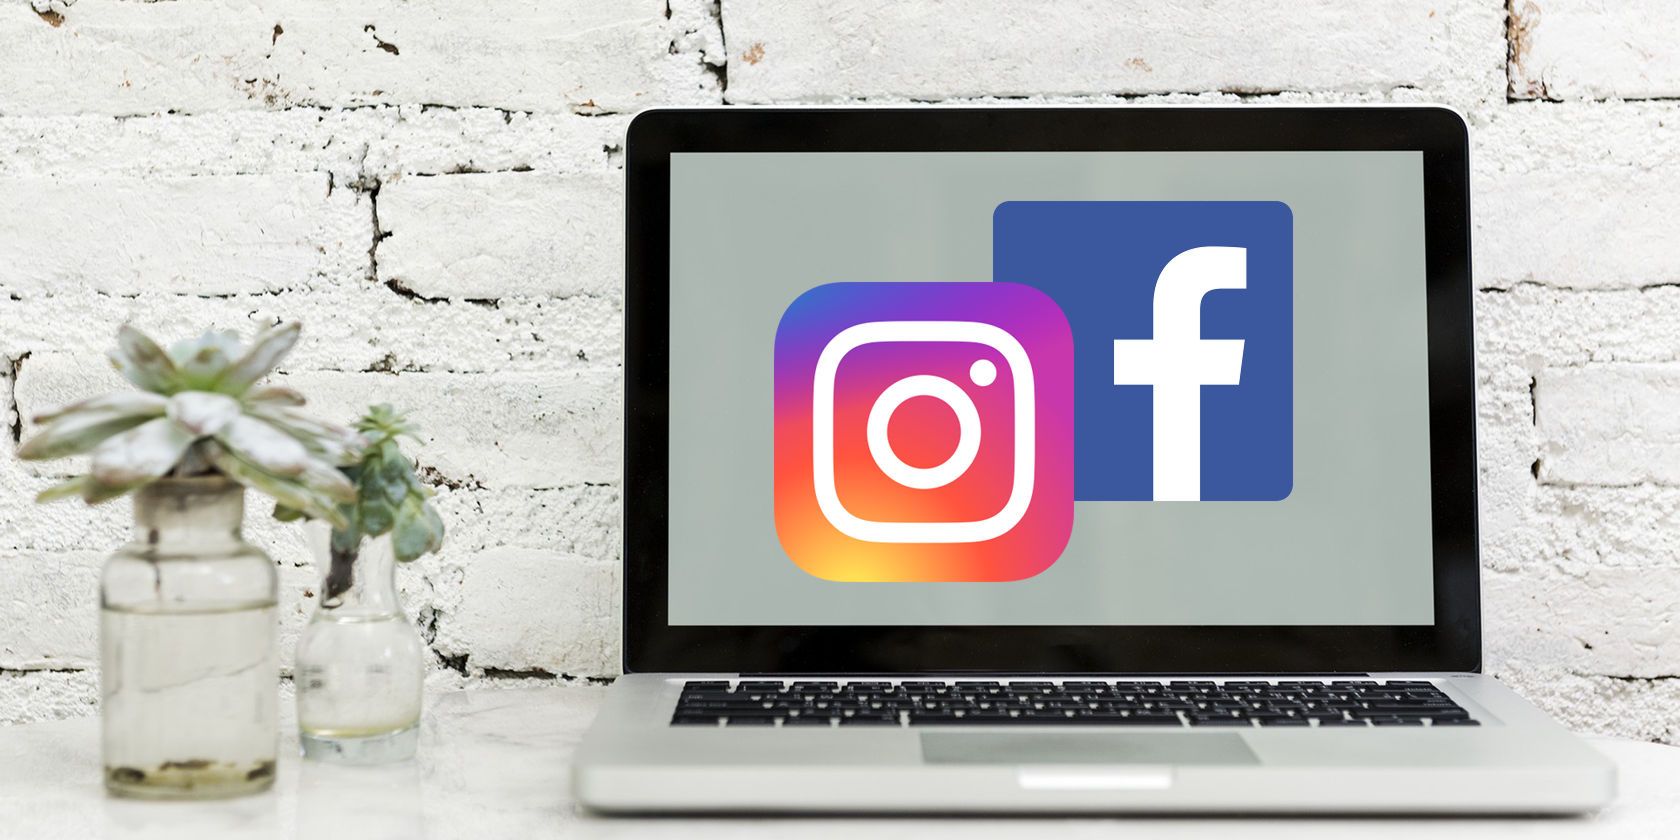 You also have to disconnect your Instagram account from Facebook?, then do this work Instagram